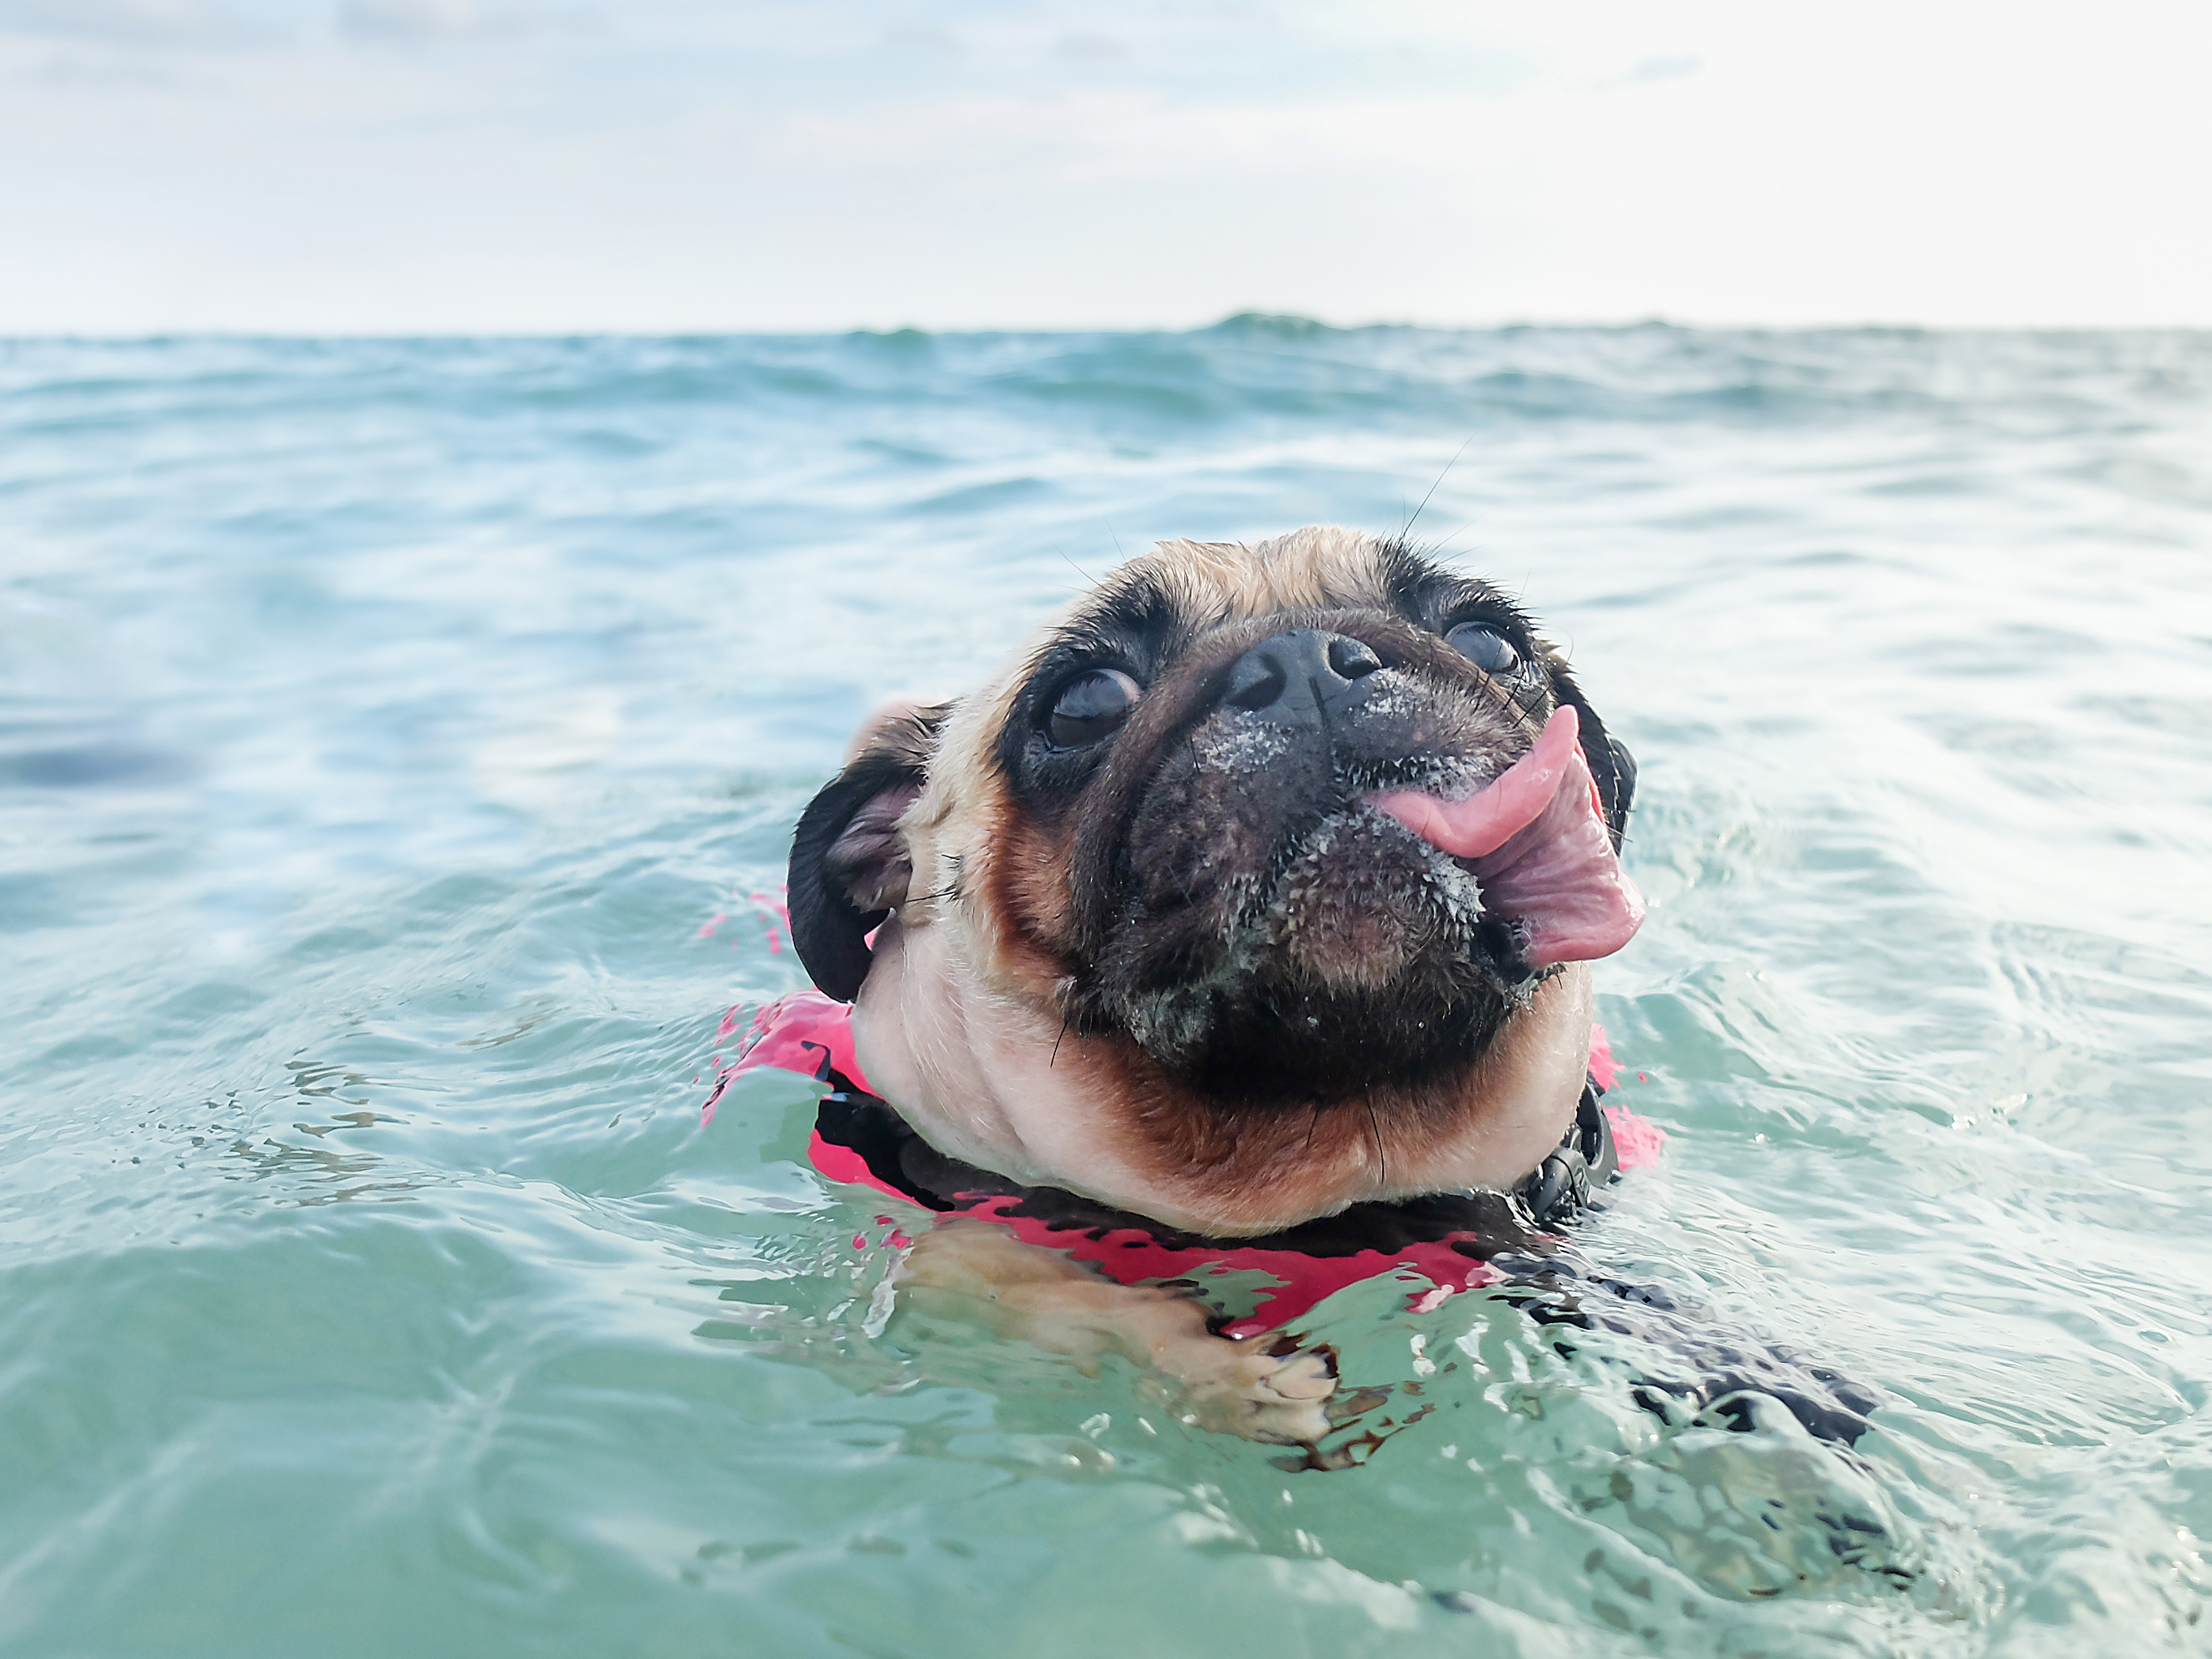 Pug swimming in the ocean wearing a pink life vest